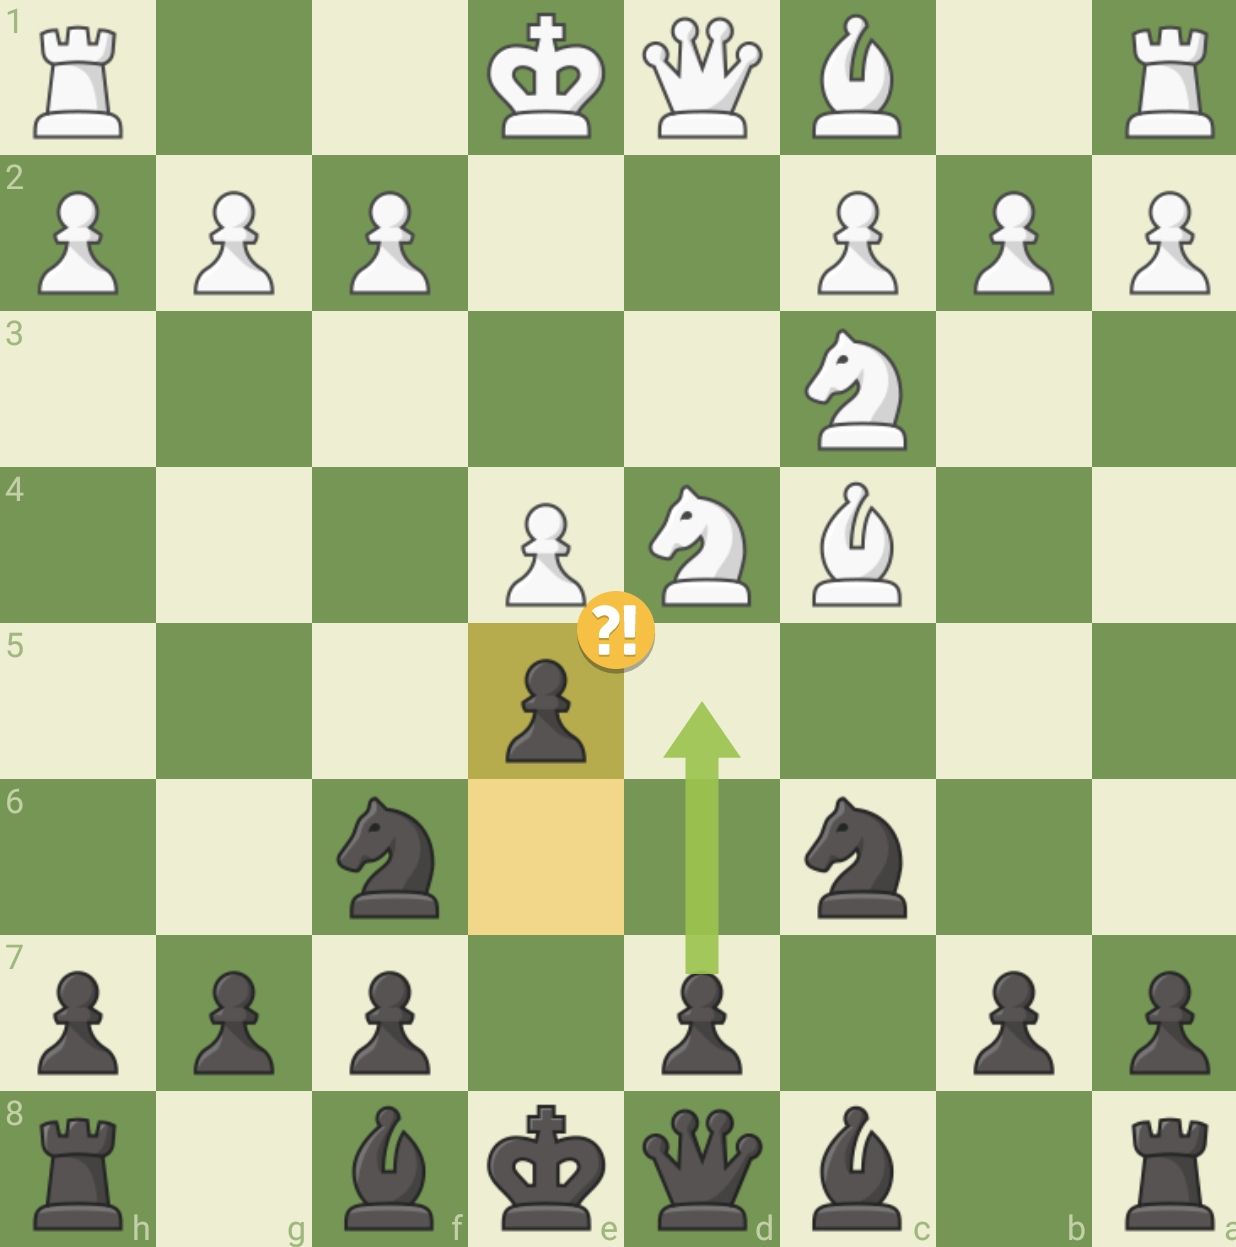 How do you evaluate open games? - Chess Forums 